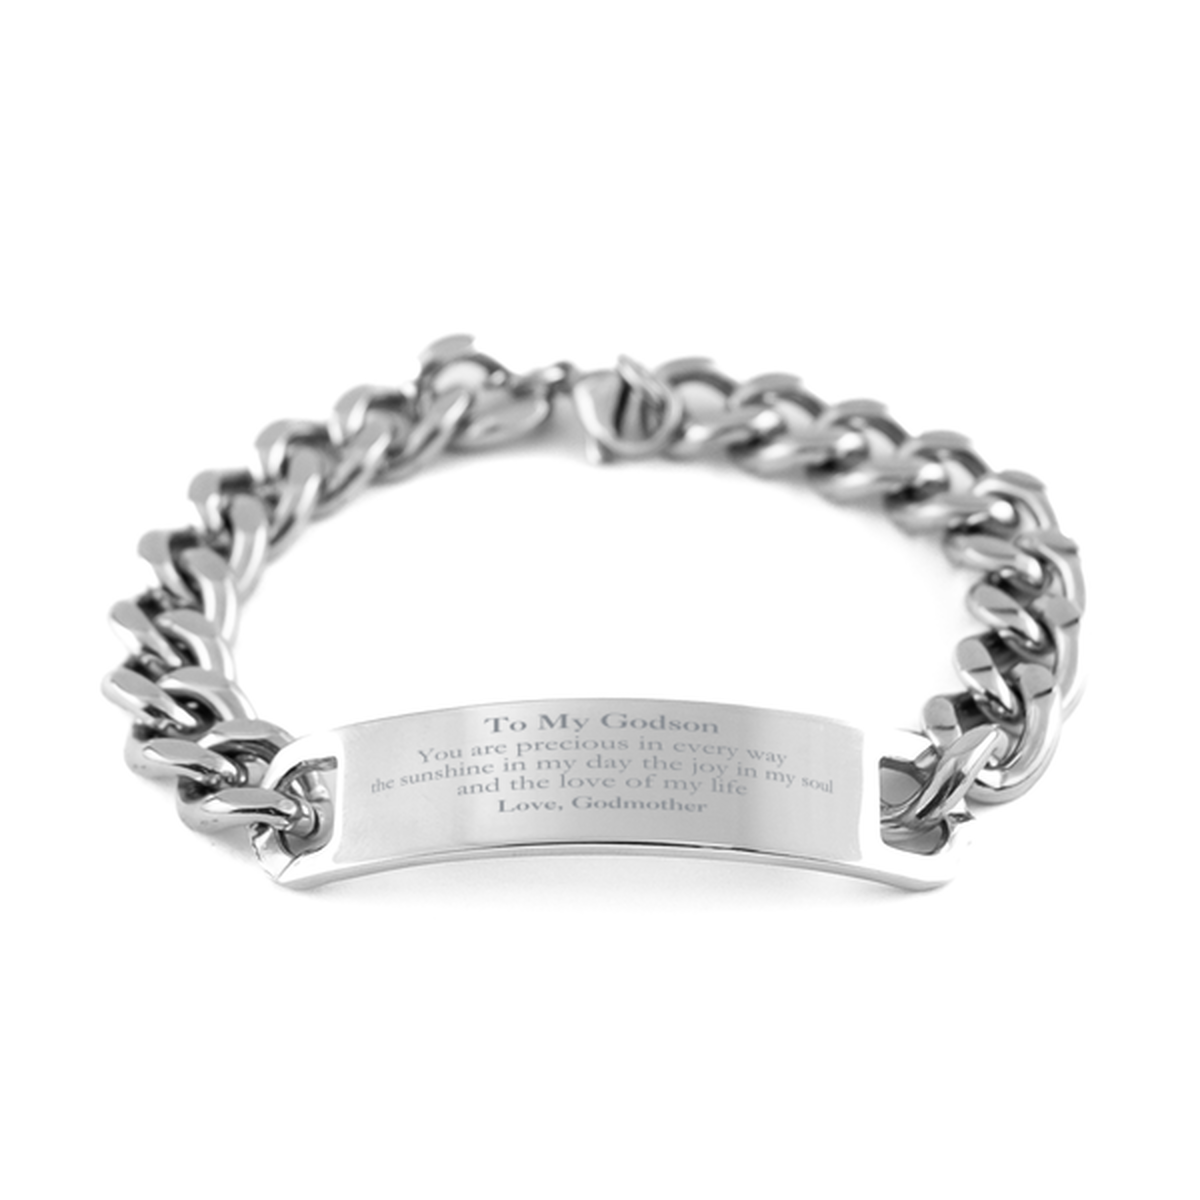 Graduation Gifts for Godson Cuban Chain Stainless Steel Bracelet Present from Godmother, Christmas Godson Birthday Gifts Godson You are precious in every way the sunshine in my day. Love, Godmother